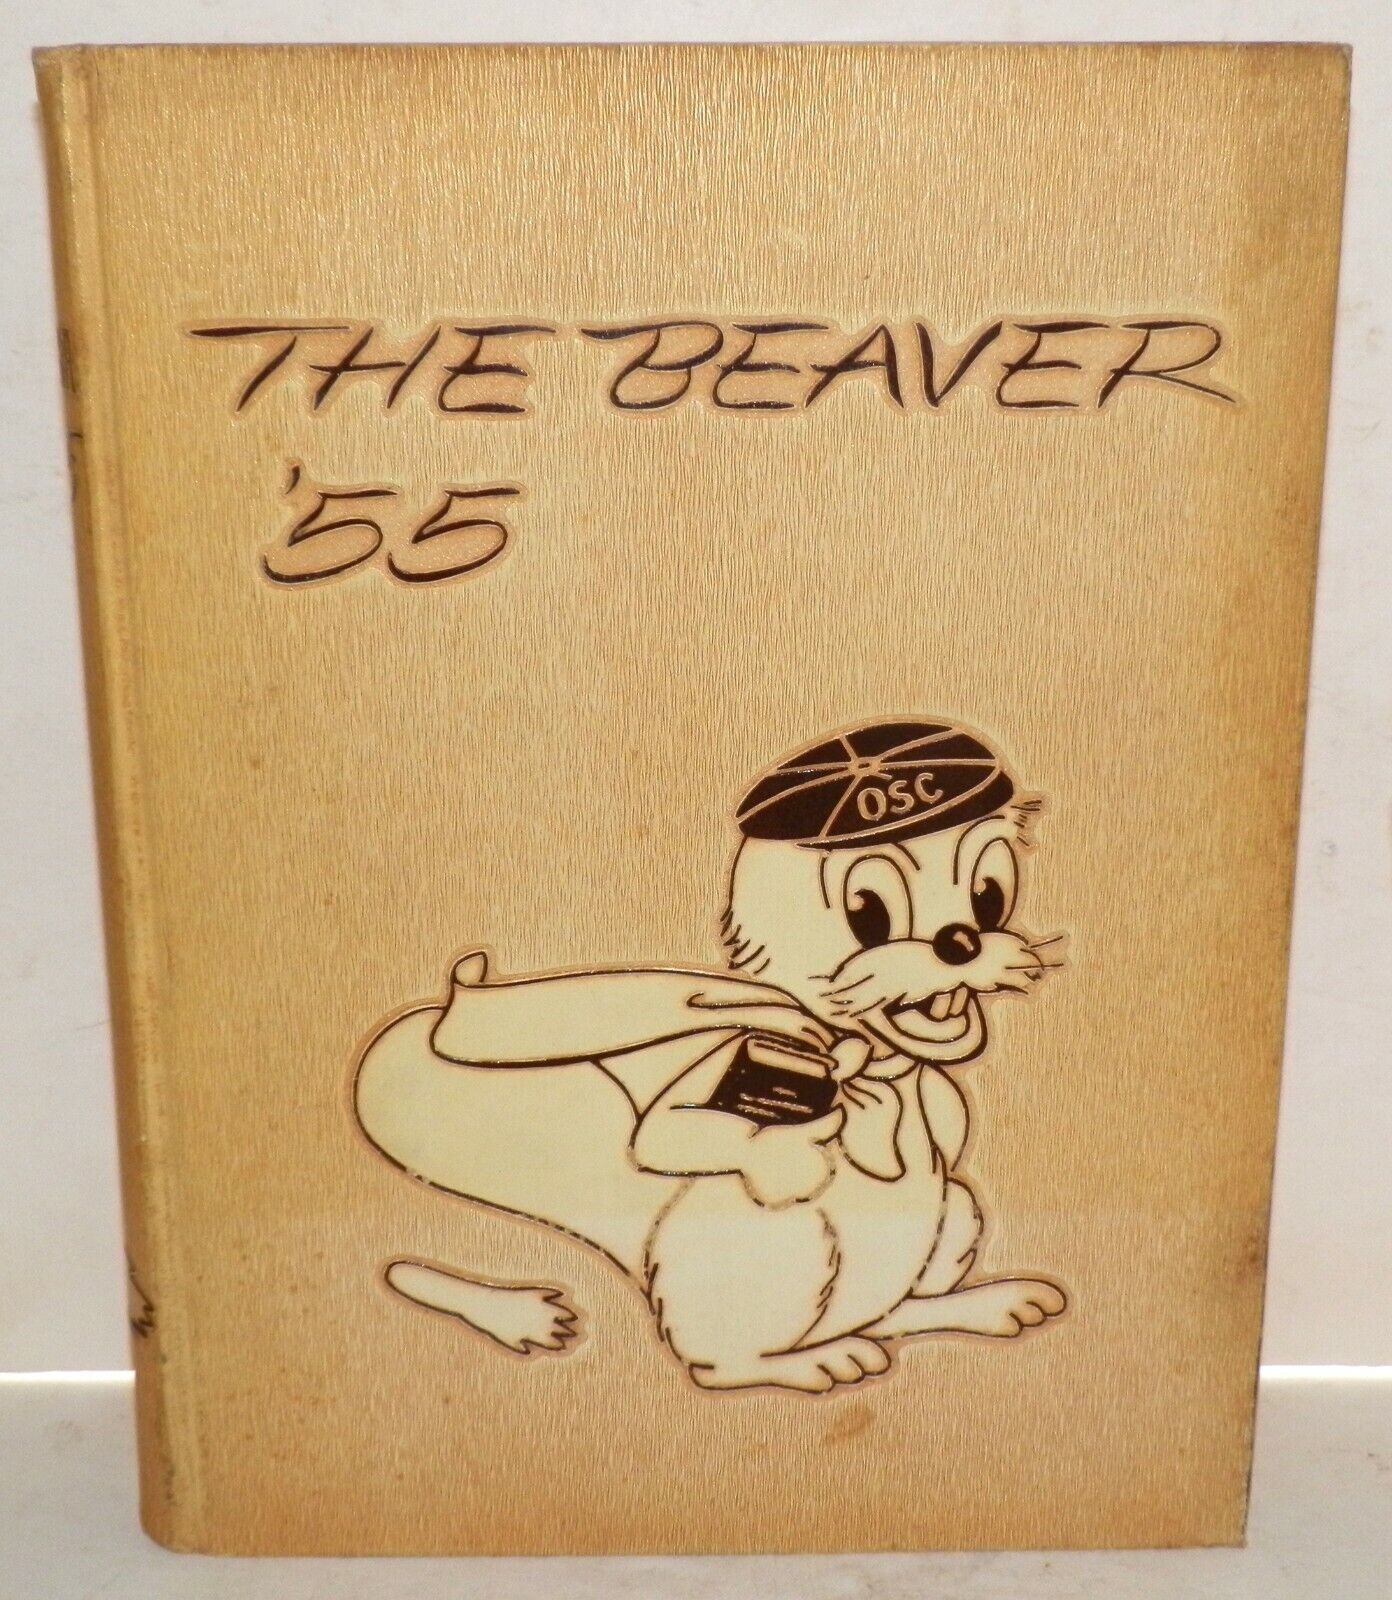 1955 Beaver Oregon State College Yearbook 